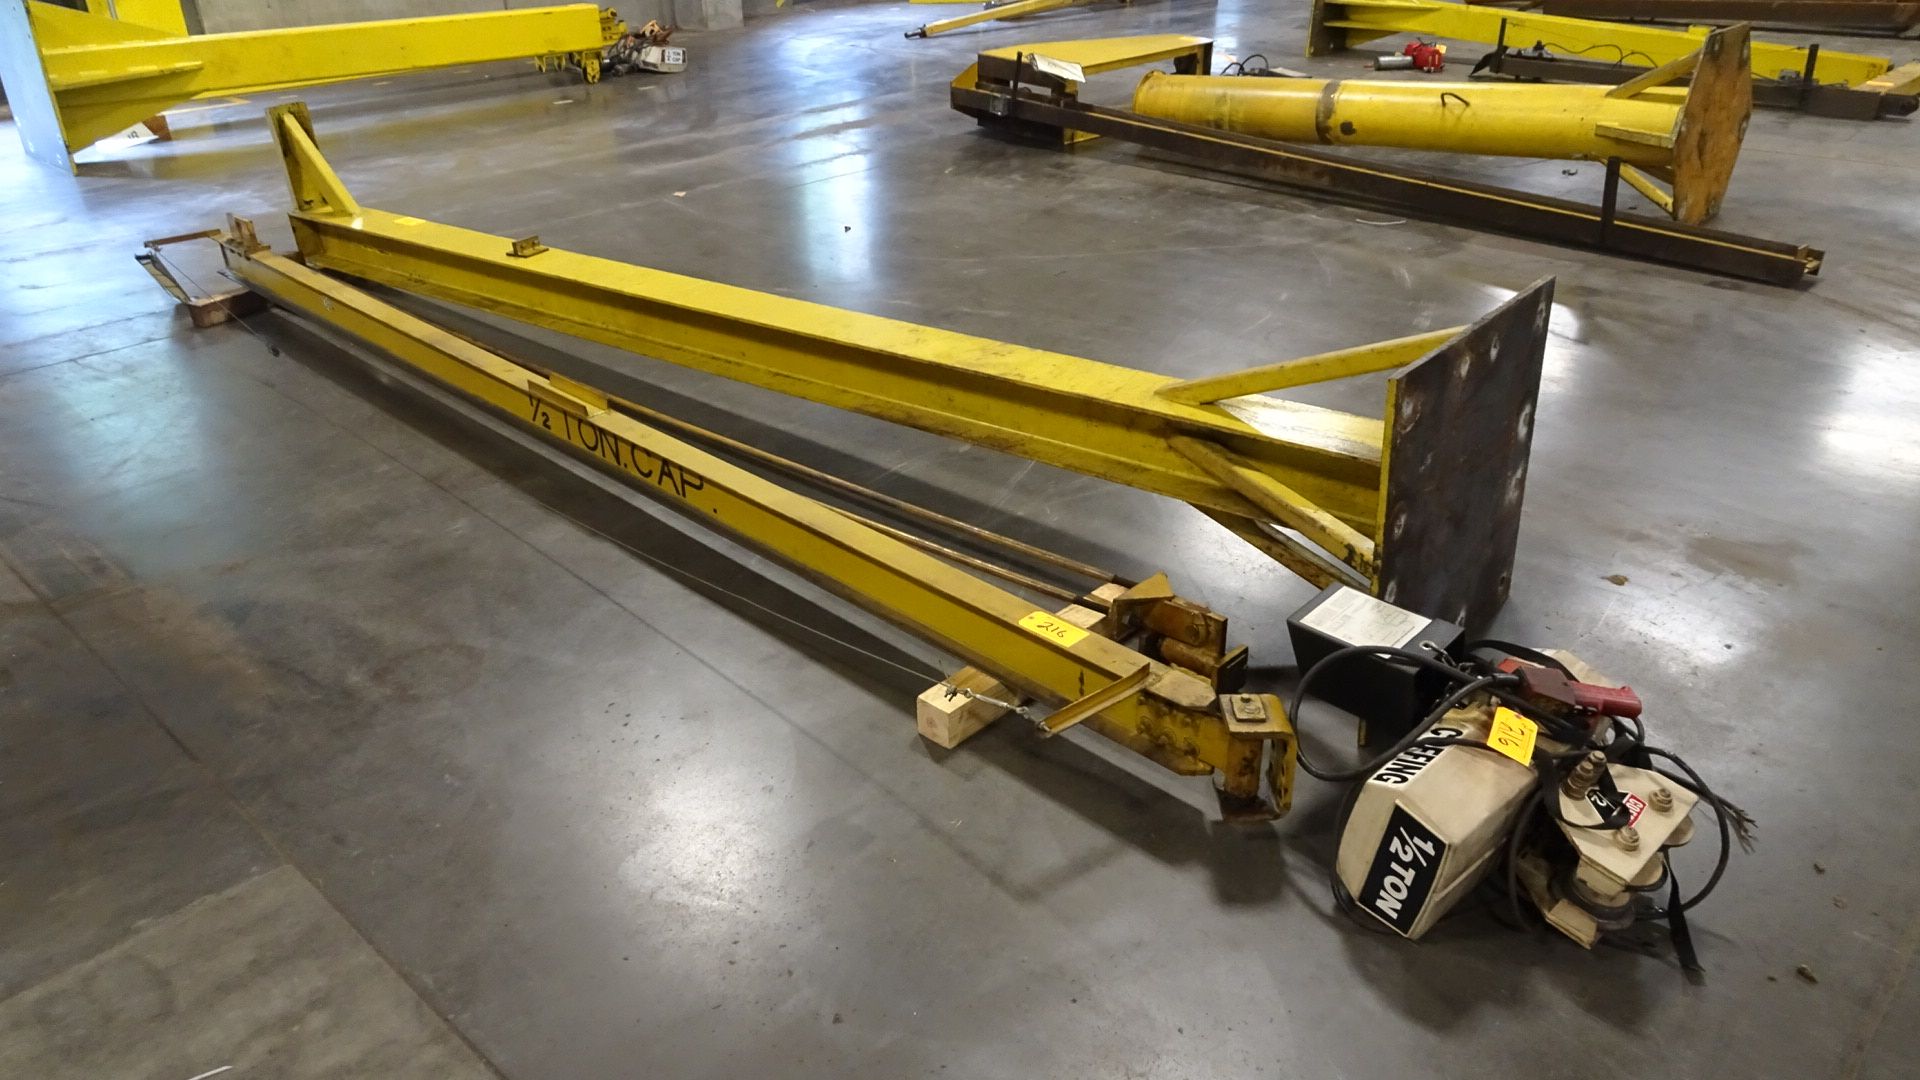 Free Standing Jib Crane with Approx 15' Column, 15' Swing Arm & Coffing 1/2-Ton Electric Chain